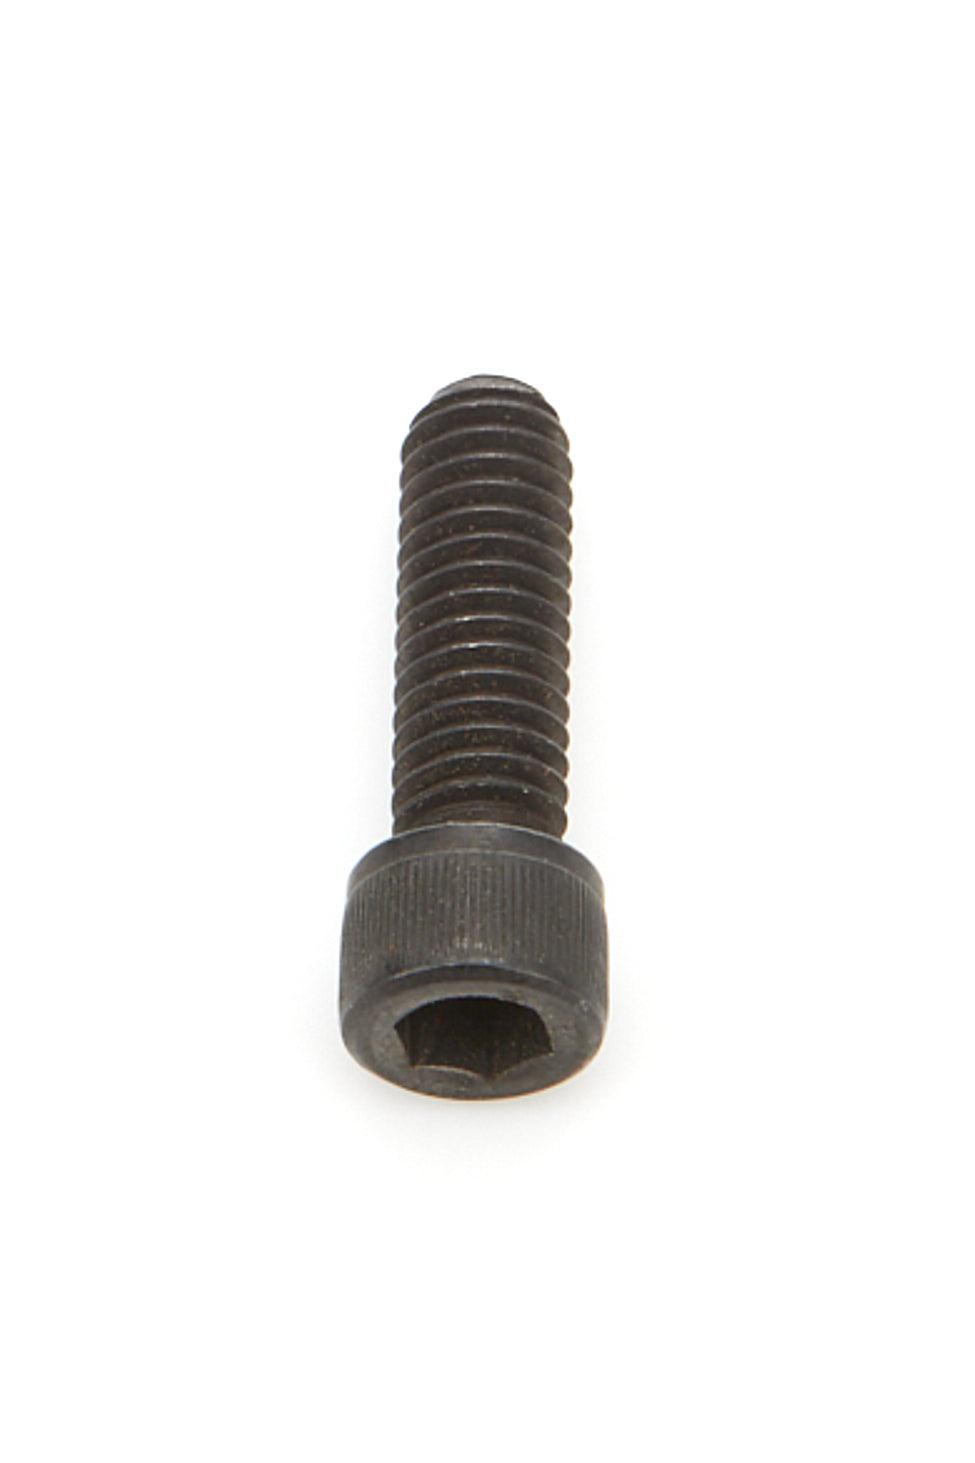 Spindle Bolt 5/16-18 x 1.0in (Single) - Burlile Performance Products